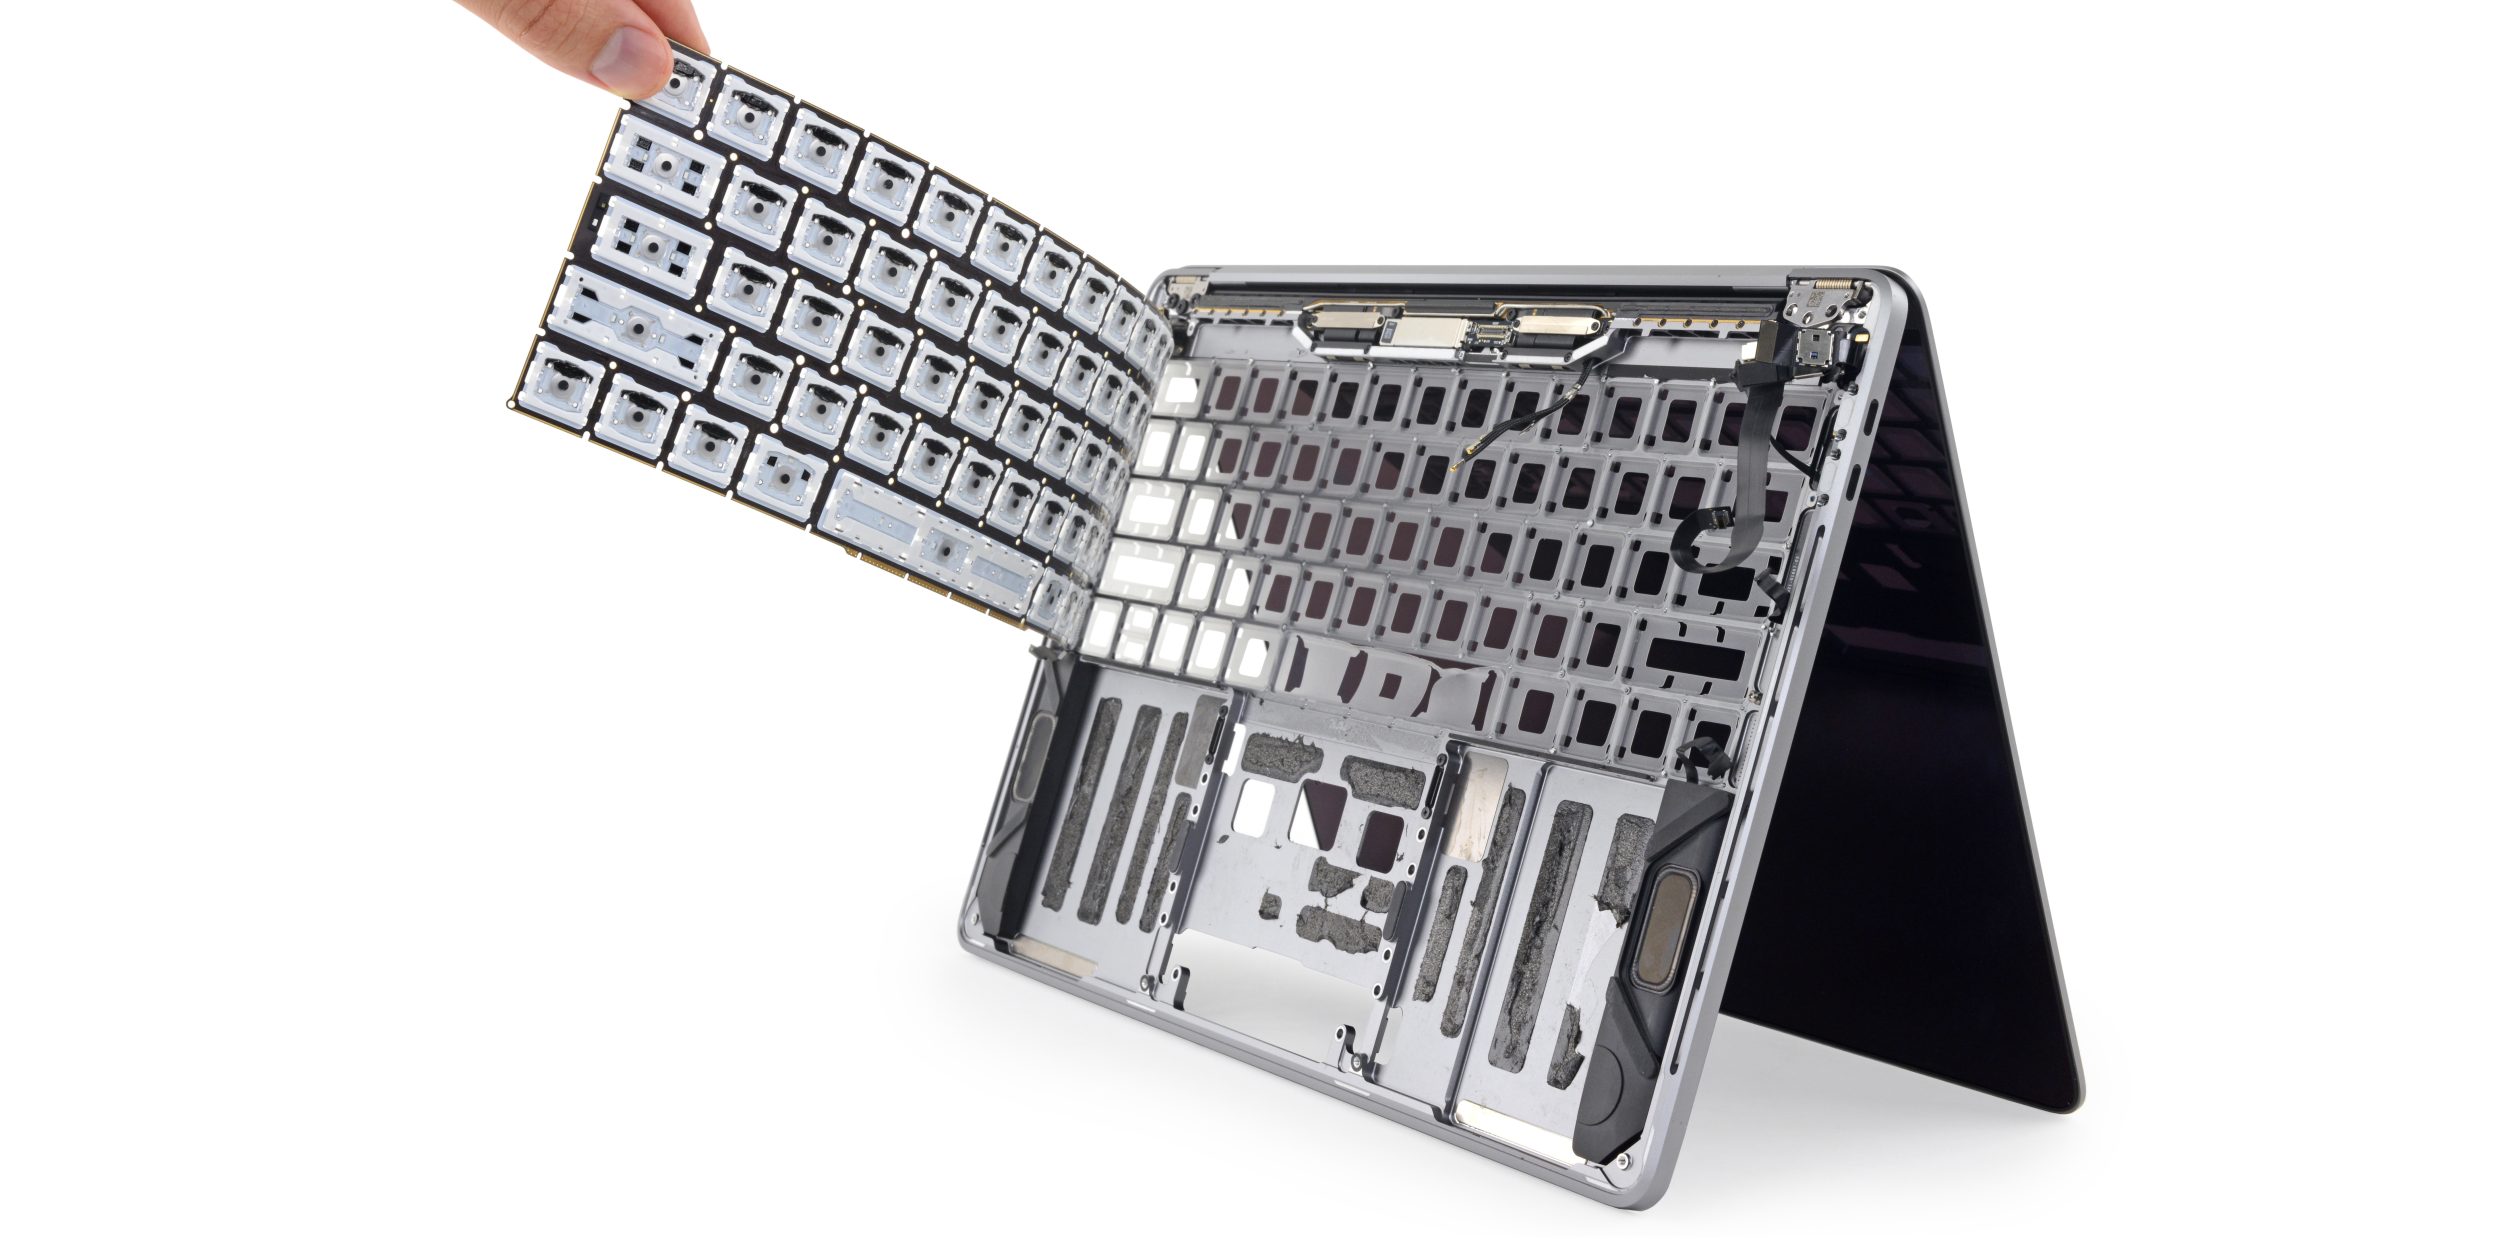 Macbook air keyboard replacement cost apple store apple macbook pro notebook check